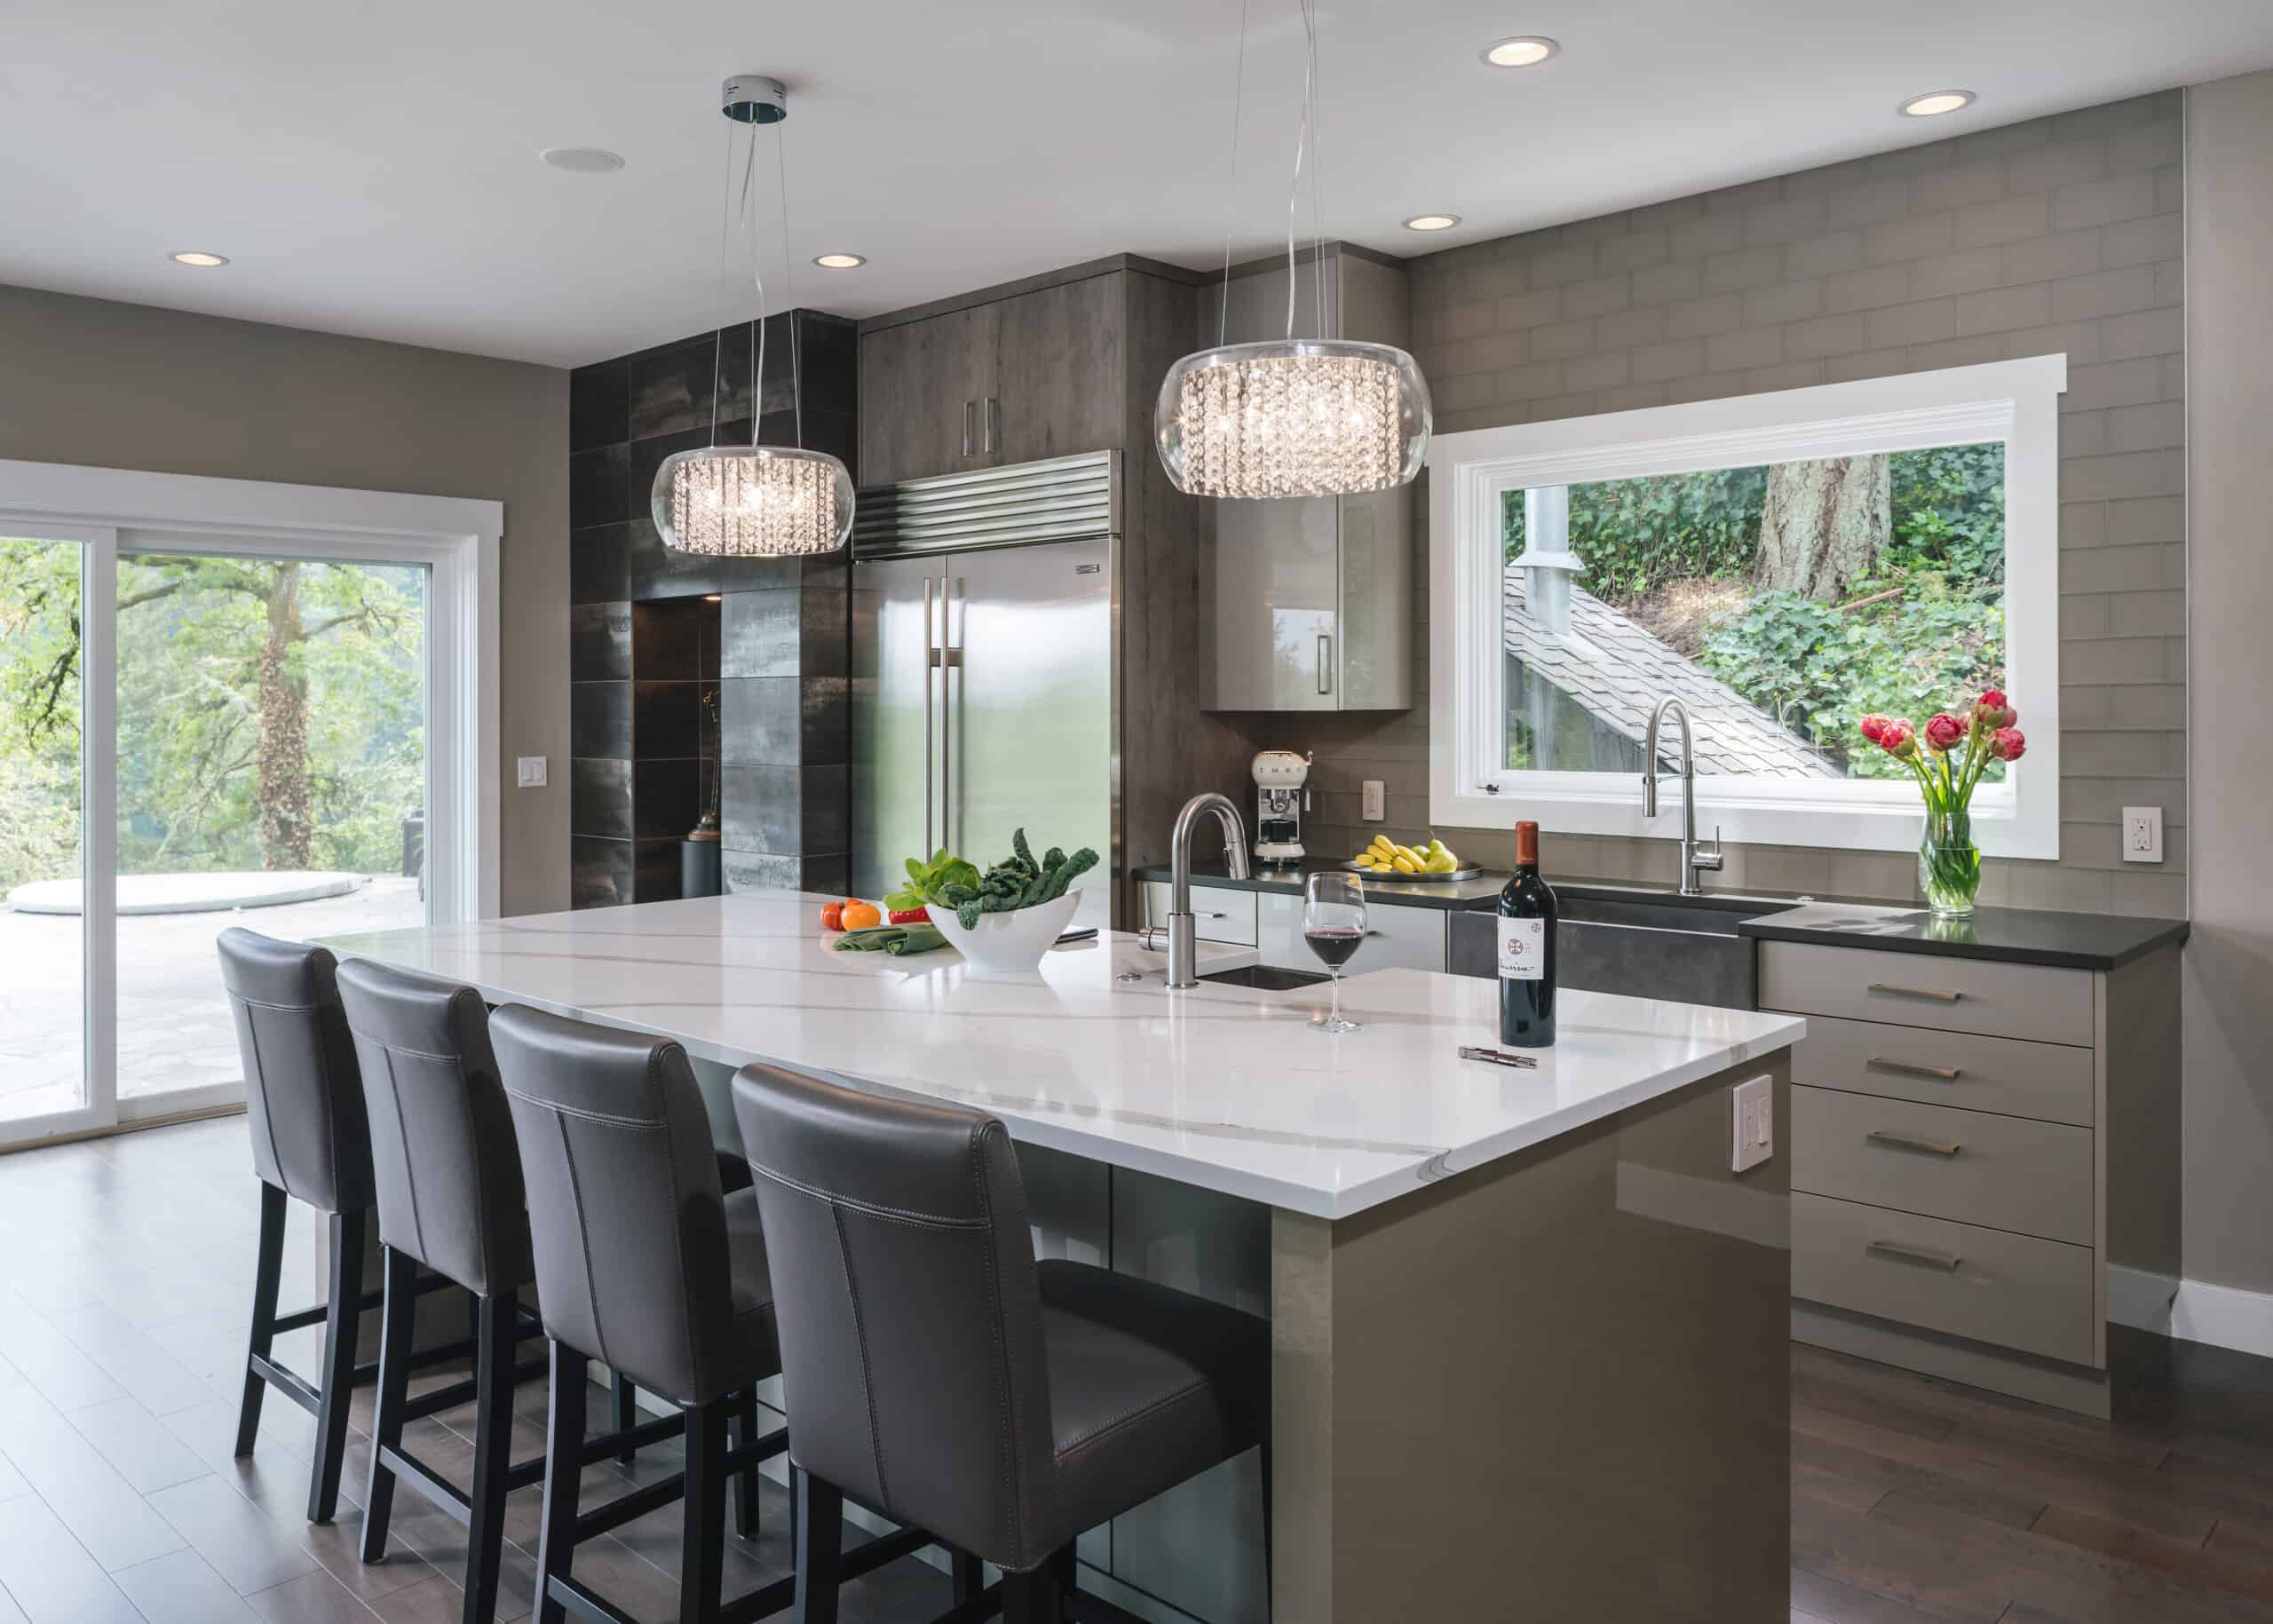 An open floor plan kitchen design in a Lake Oswego home remodel